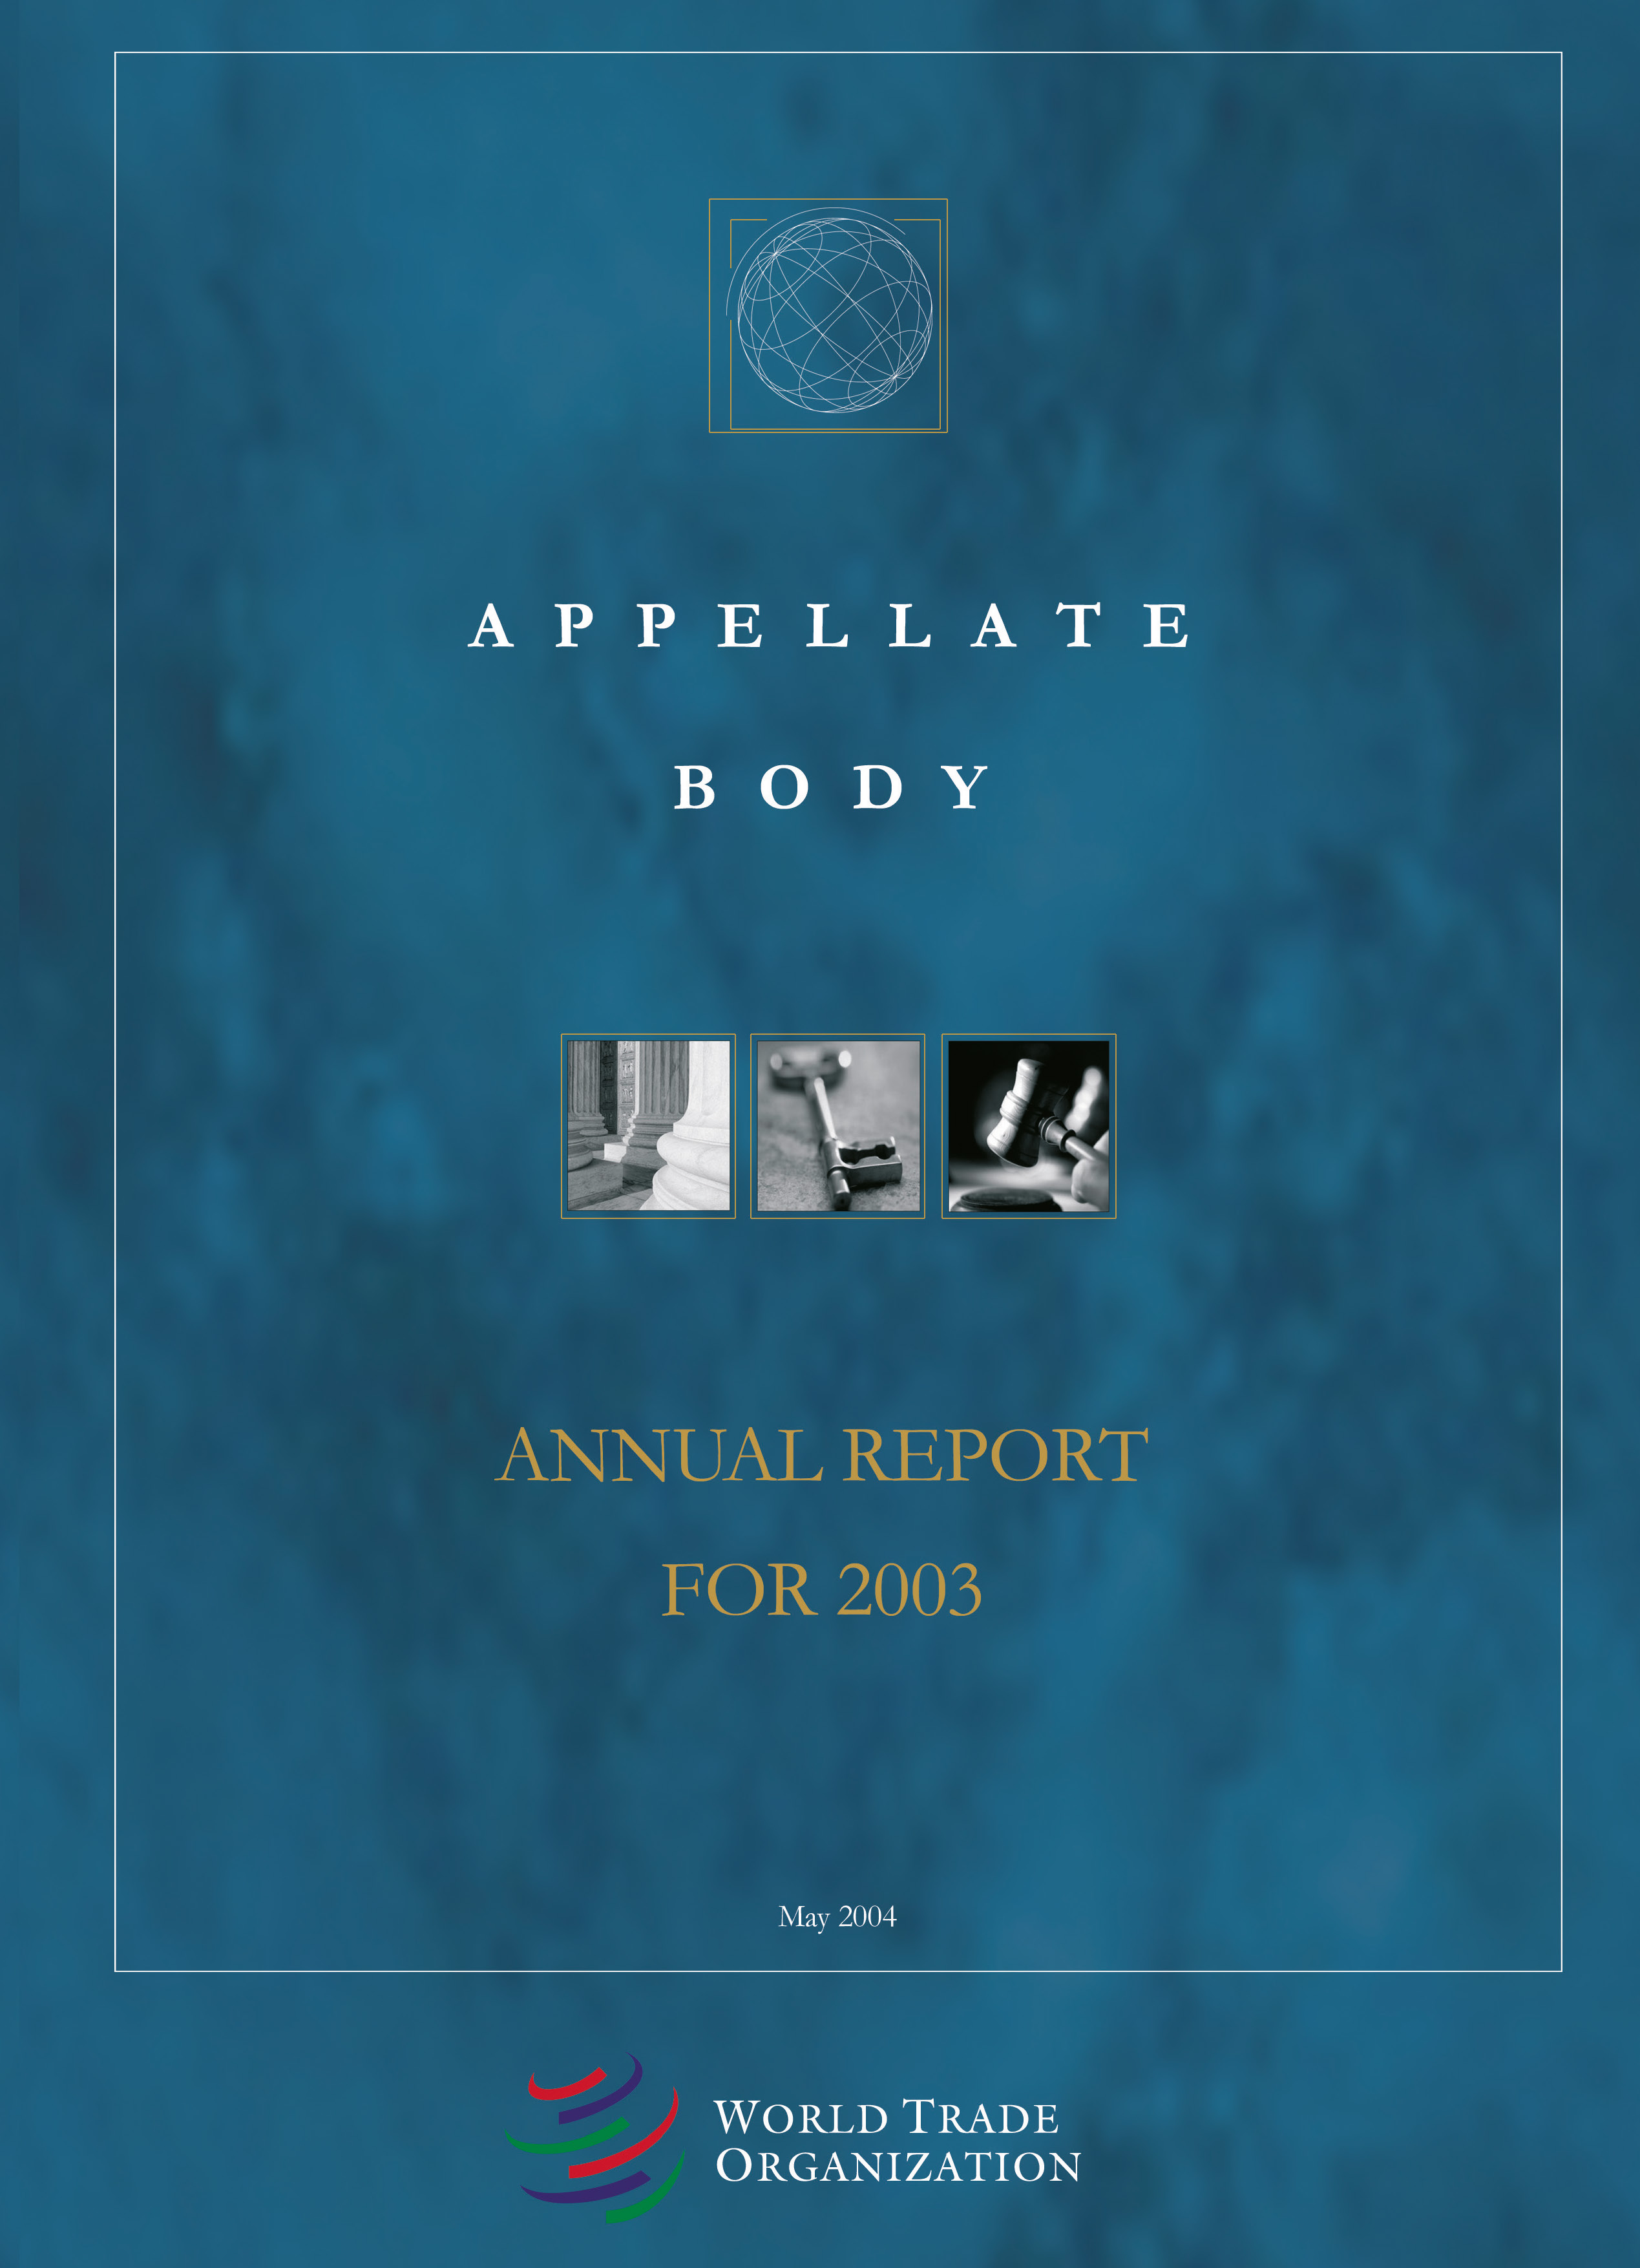 image of Appellate Body annual report for 2003